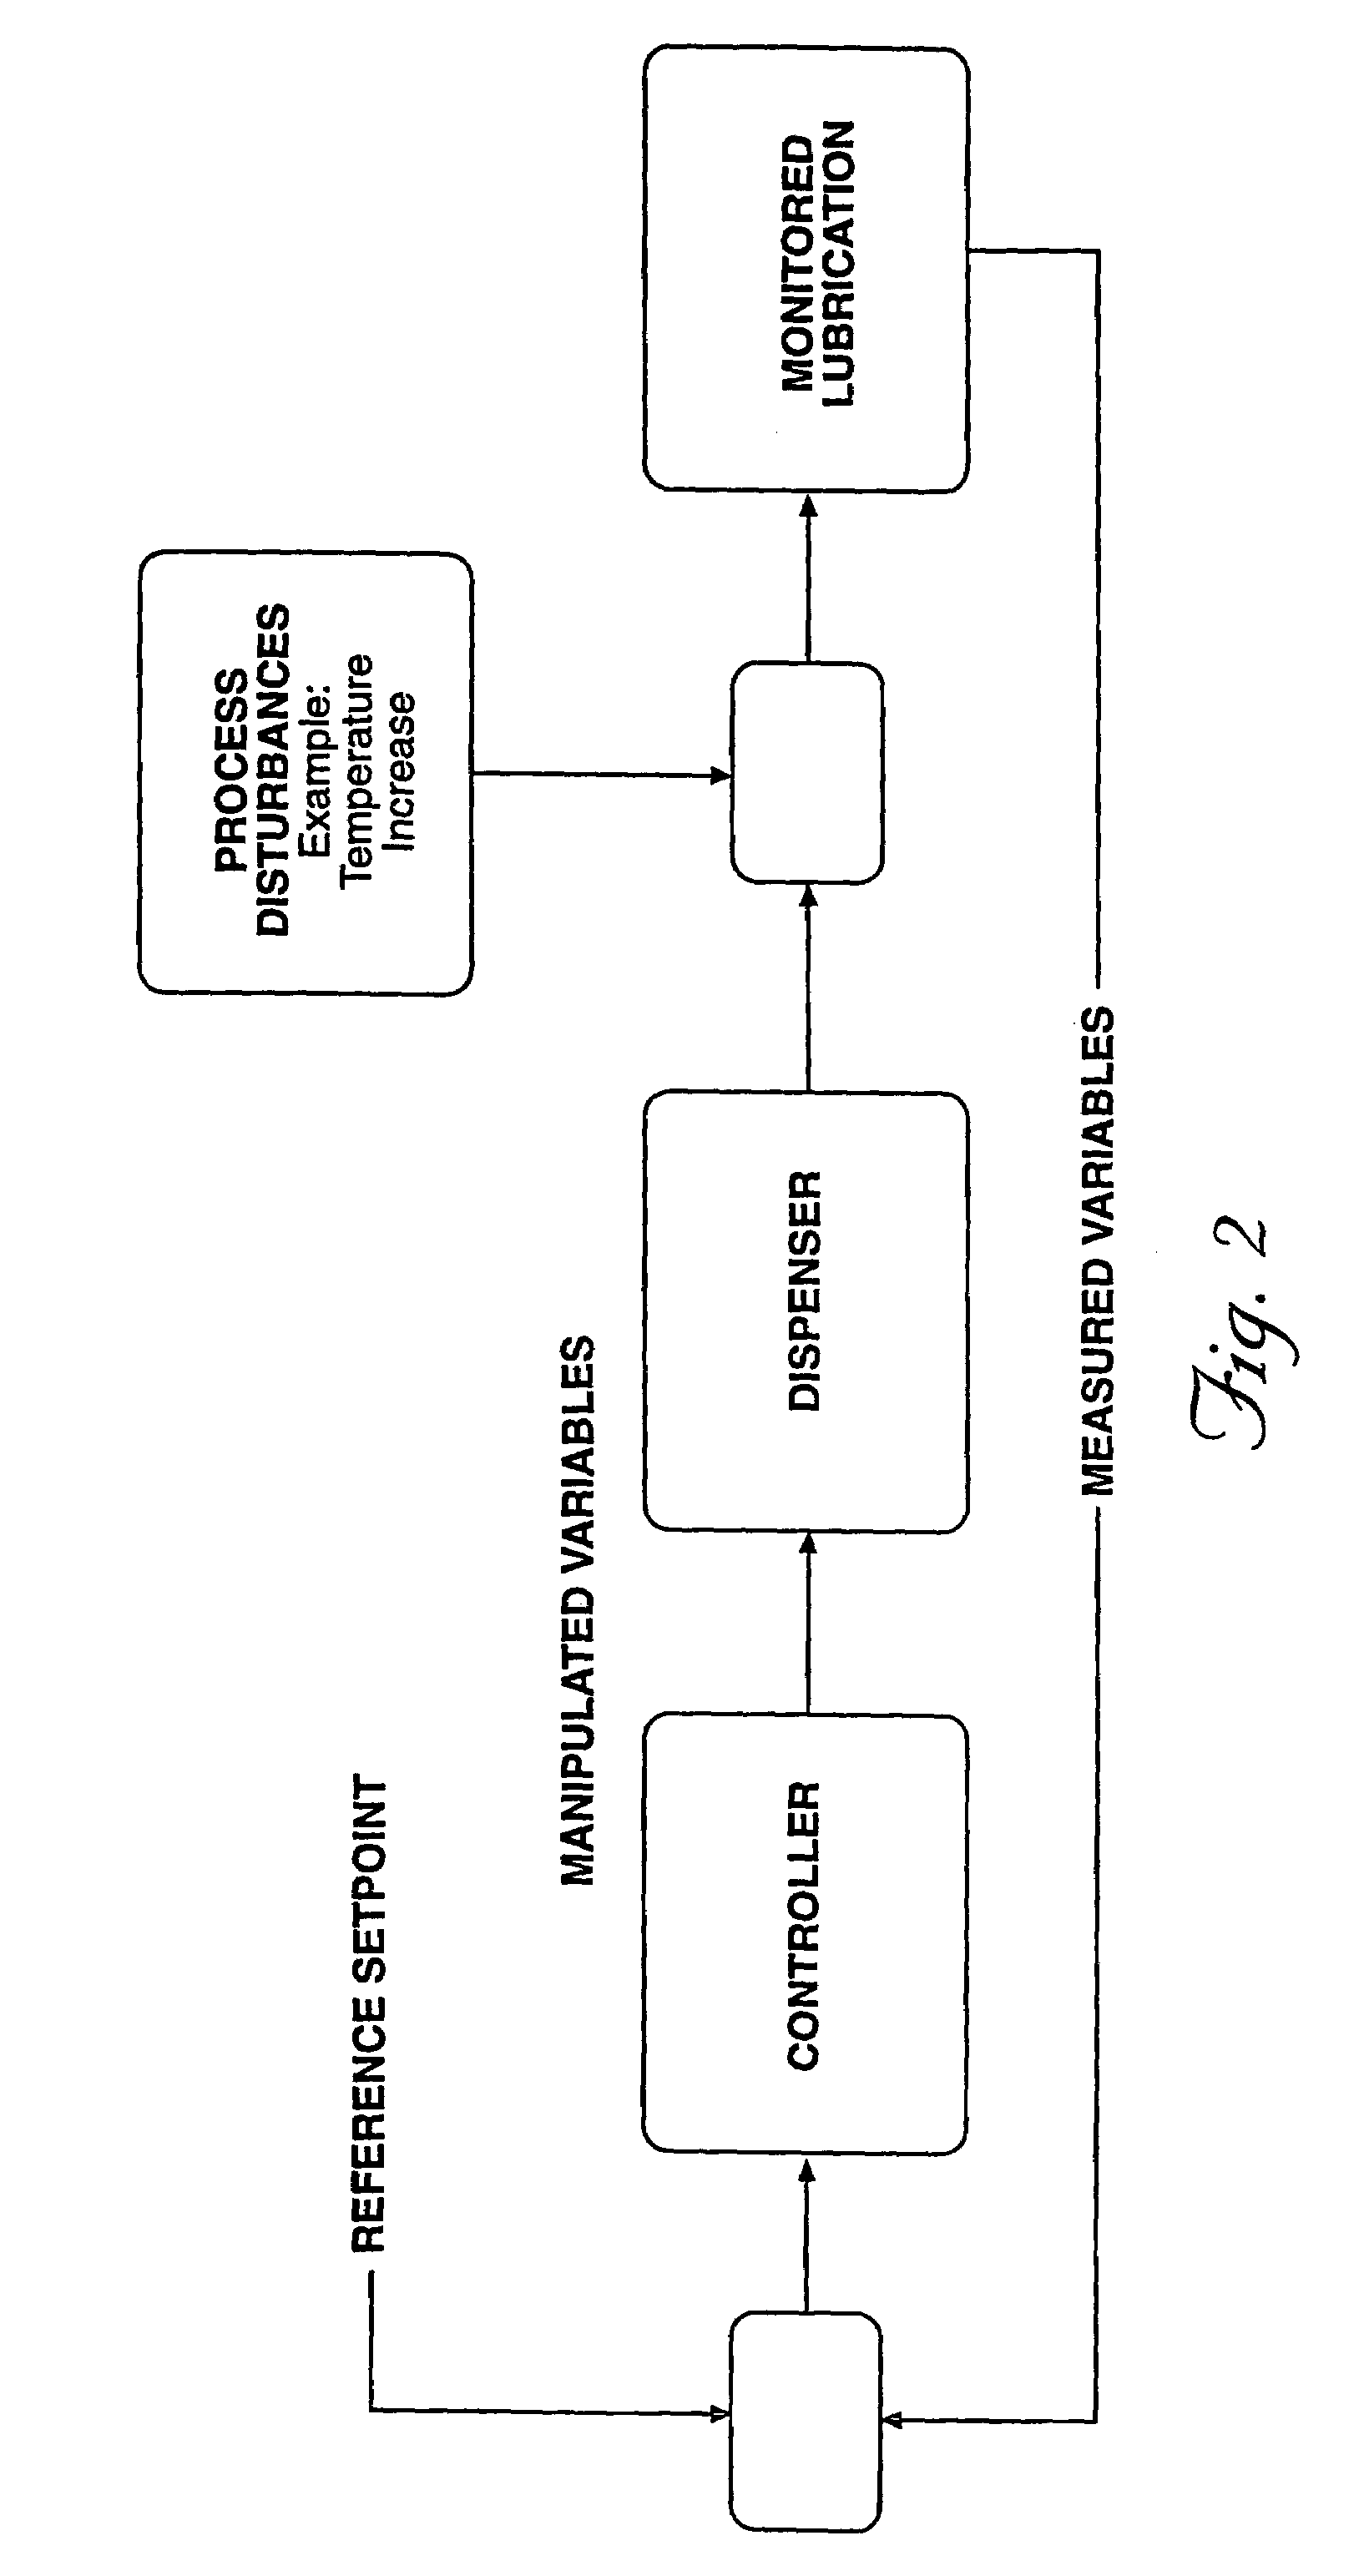 Apparatus and method for lubricant condition control and monitoring